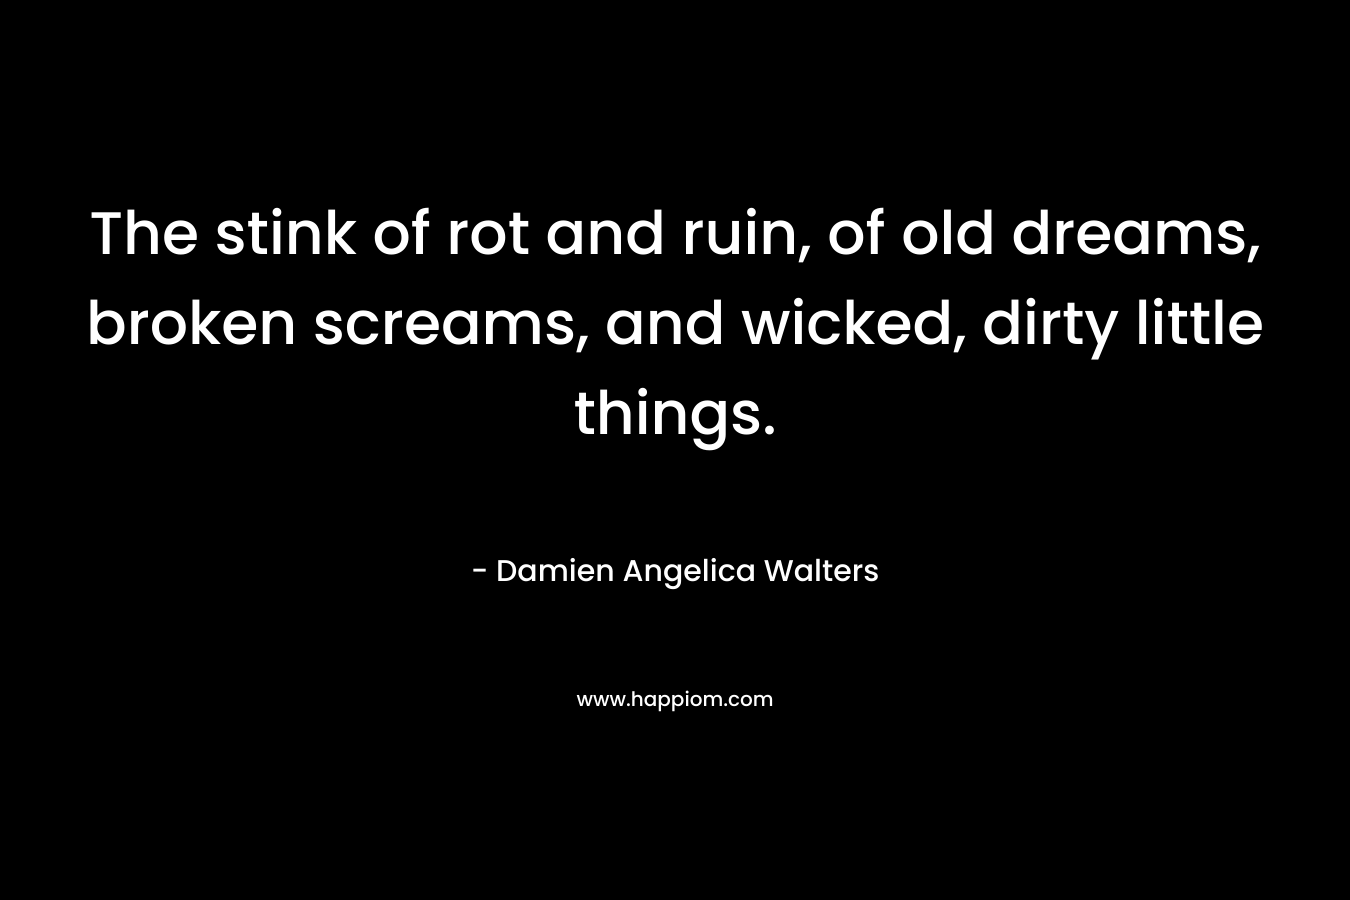 The stink of rot and ruin, of old dreams, broken screams, and wicked, dirty little things. – Damien Angelica Walters